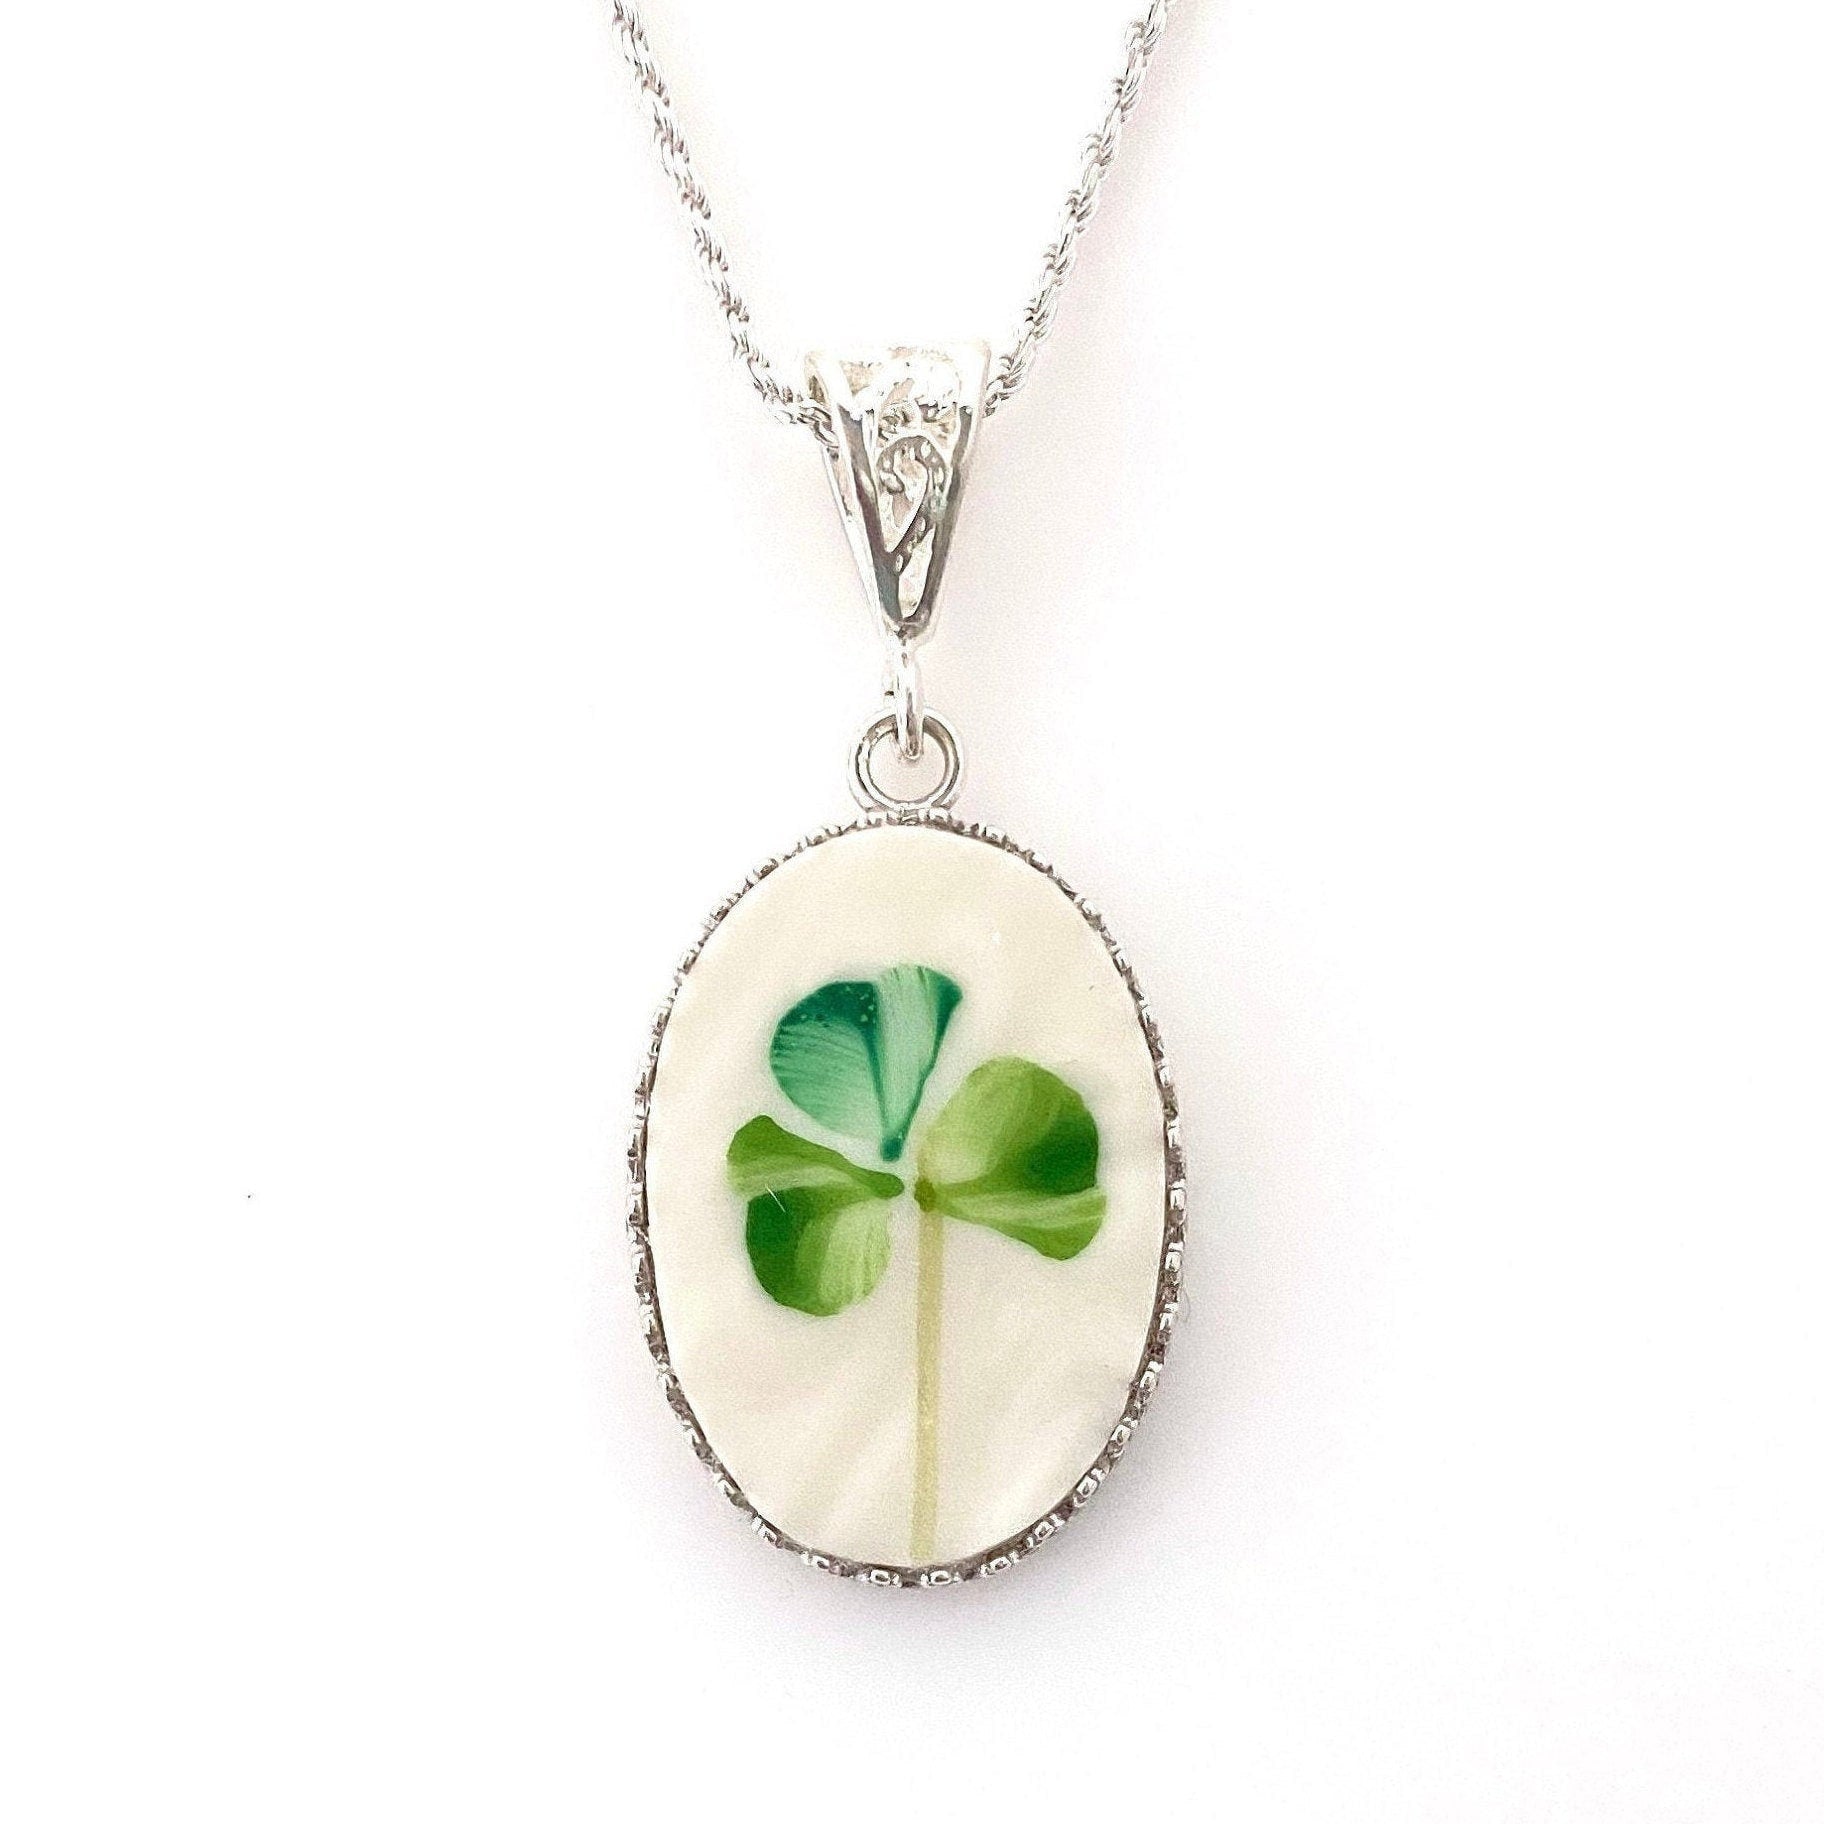 Celtic Necklace, Irish Broken China Jewelry, 20th Anniversary Gift for Wife, Sterling Silver, Belleek China from Ireland, Gifts for Her